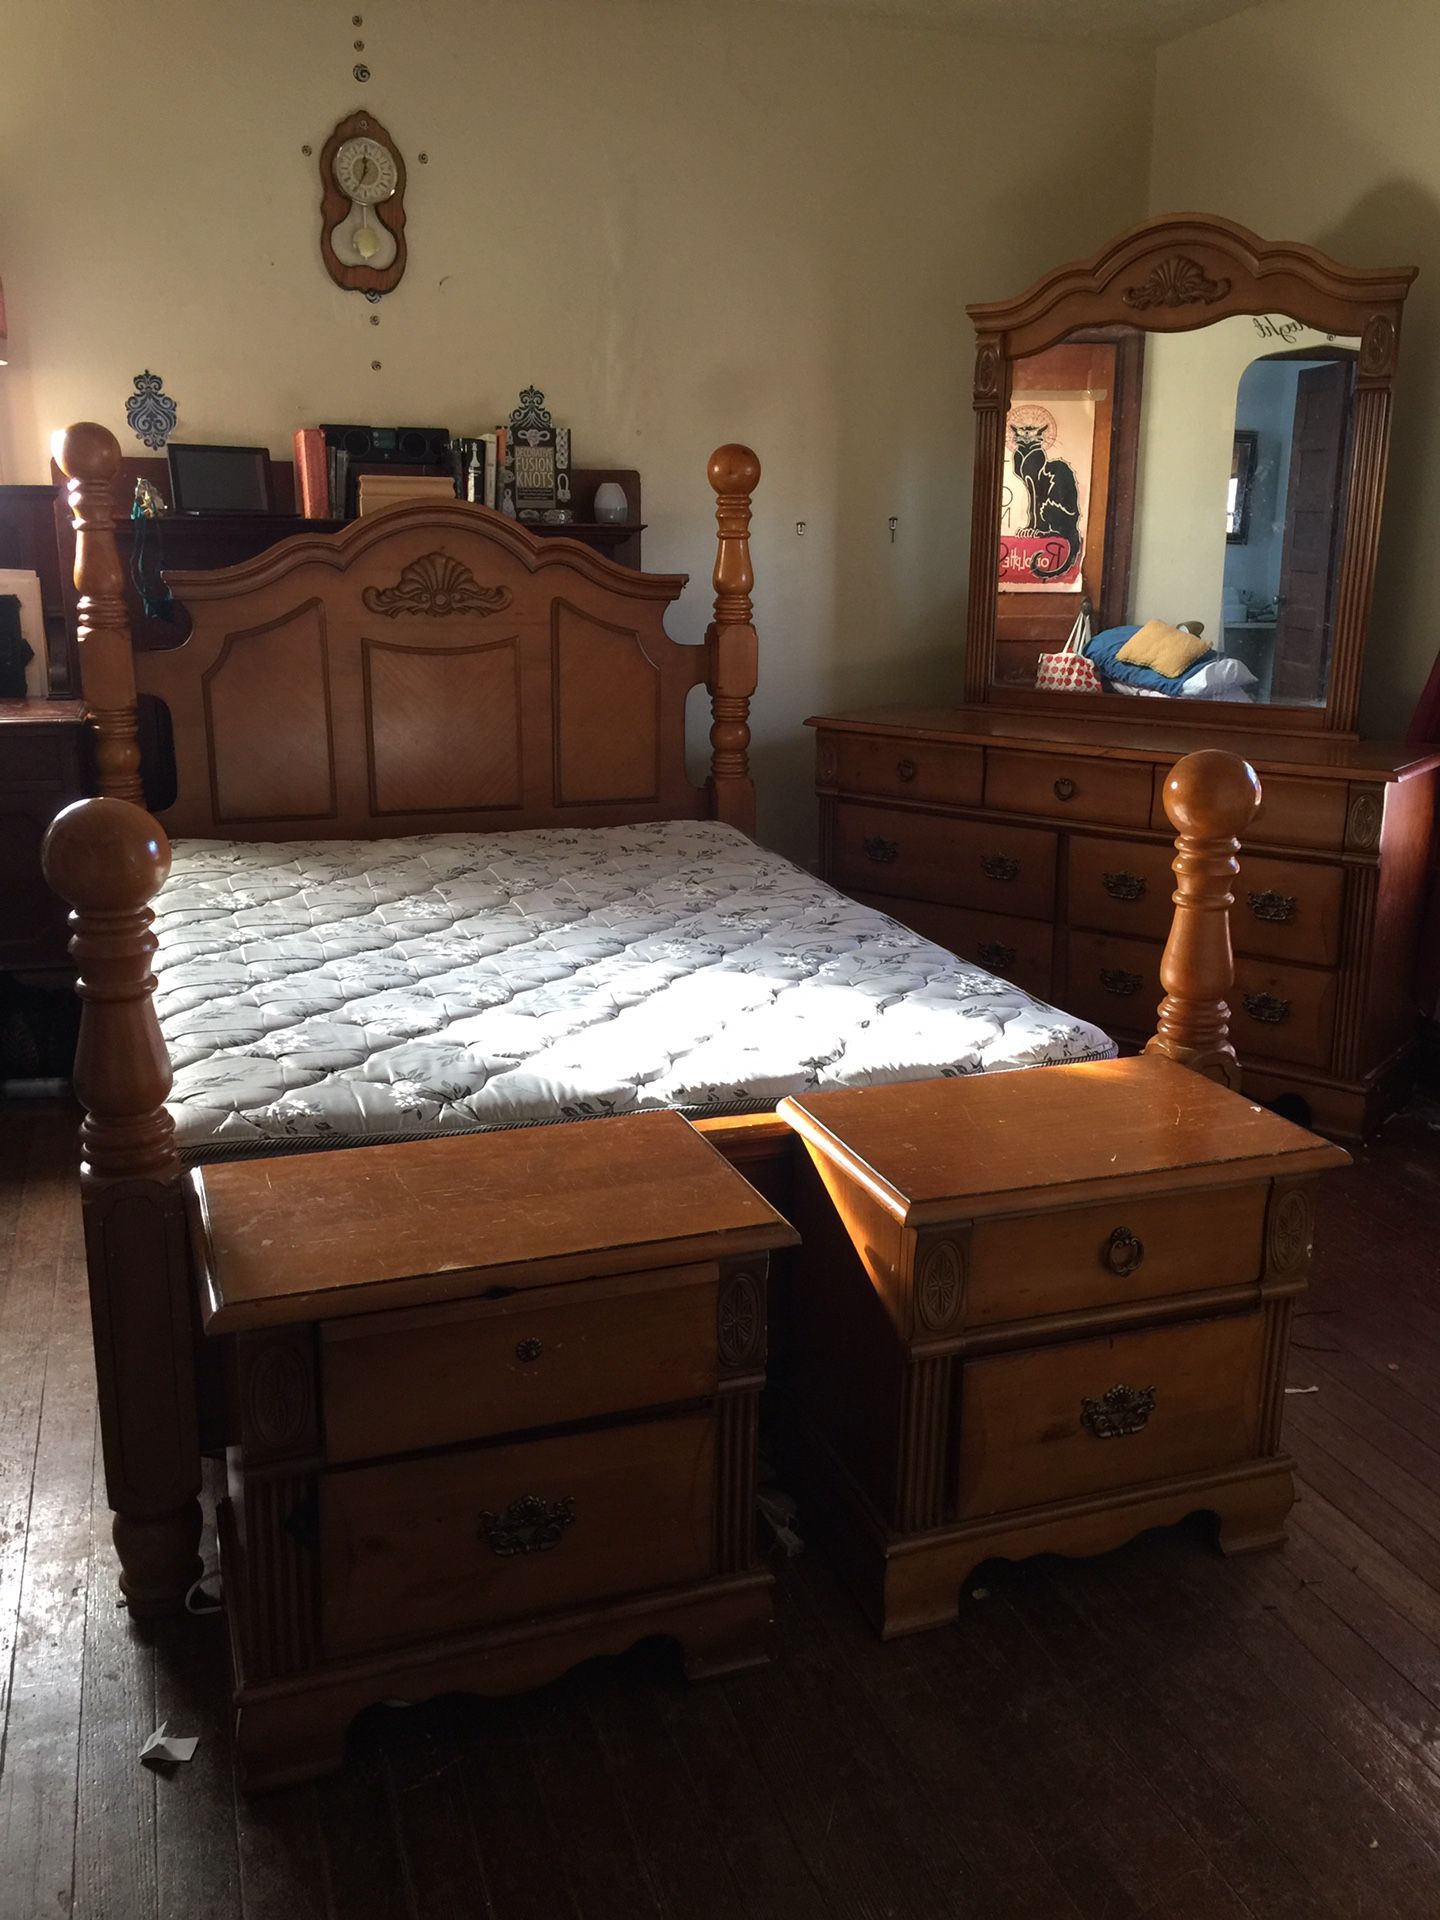 Beautiful engraved wood bed set- bought for $3500 selling for $700 OBO 2 1/2 years later... Queen size Matteess and bed frame- Full size dresser and